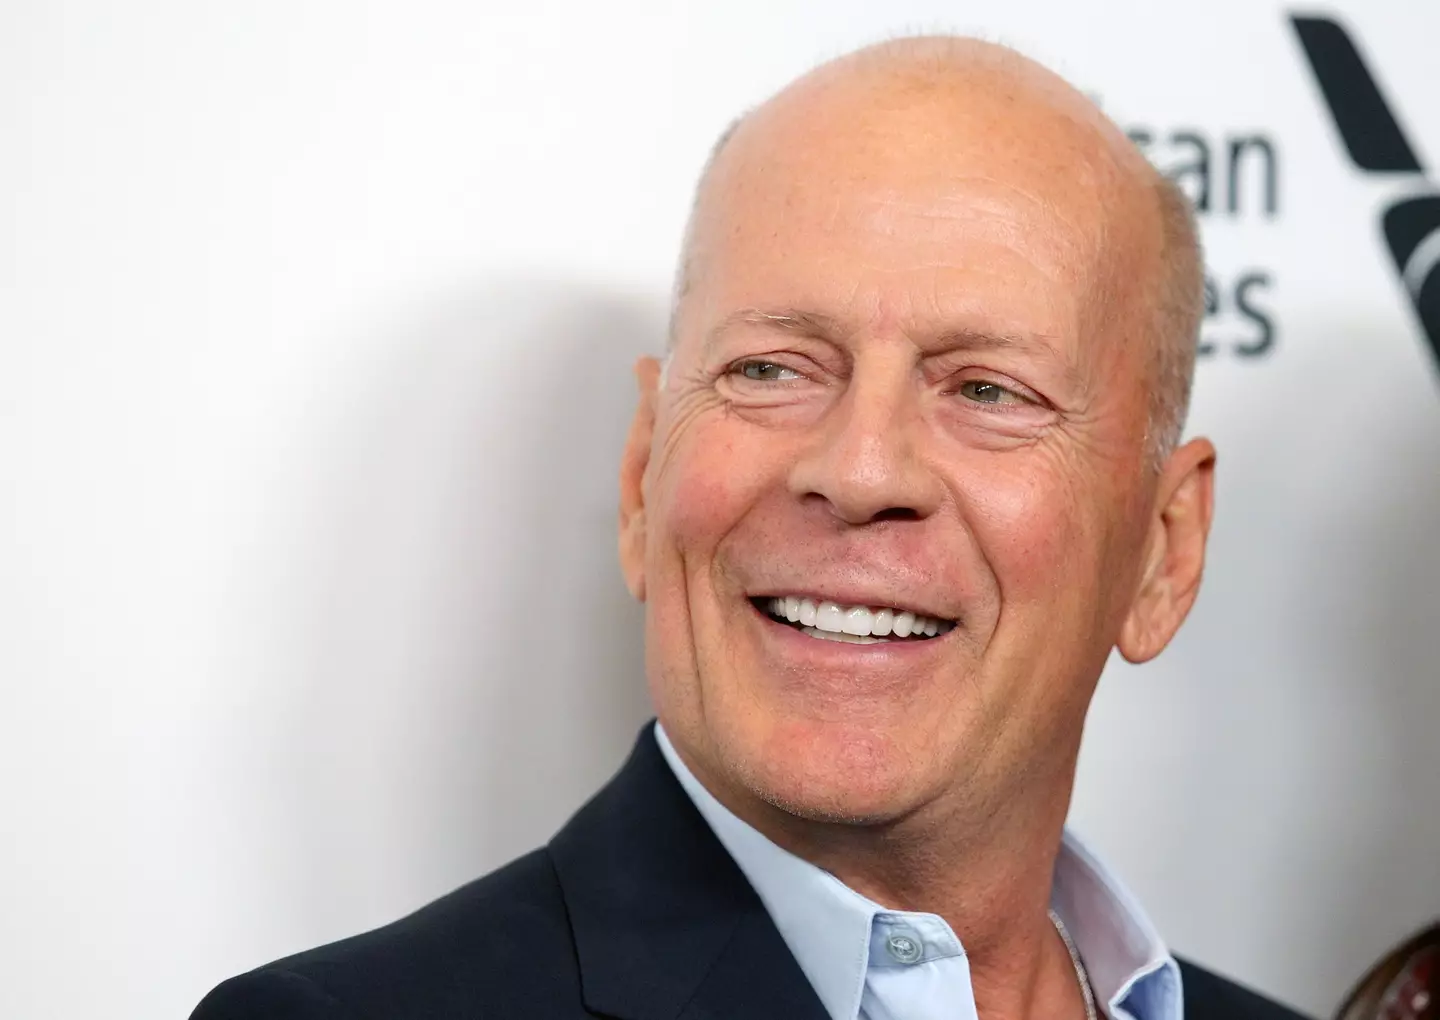 Bruce Willis retired from acting after his diagnosis.